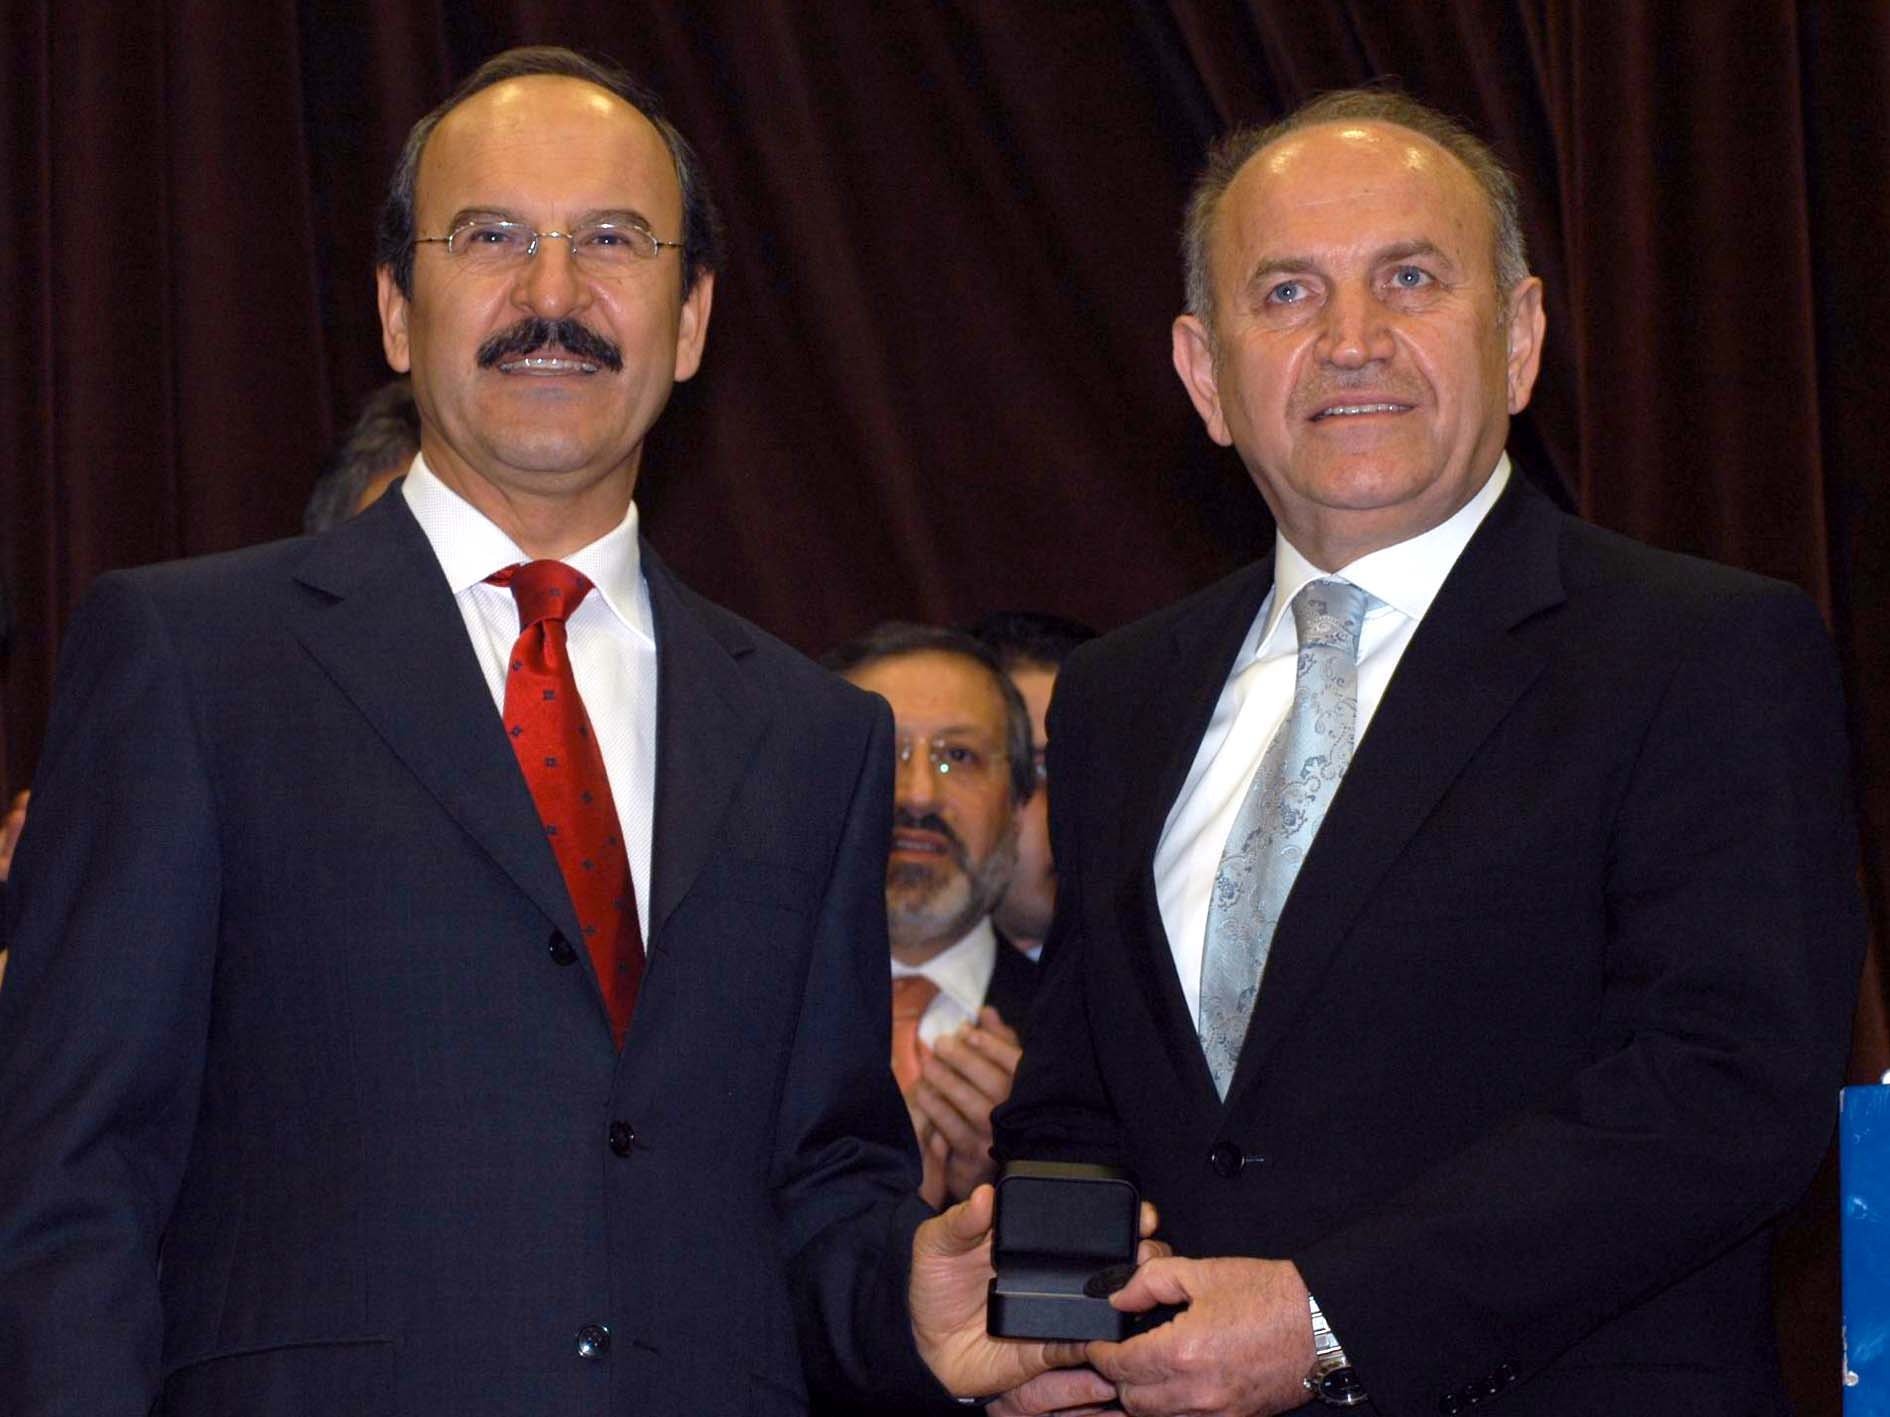 This file photo shows former Istanbul Mayor Kadir Topbaş (R) assuming the duty from his predecessor Ali Müfit Gürtuna following the 2004 local elections. (AA Photo)